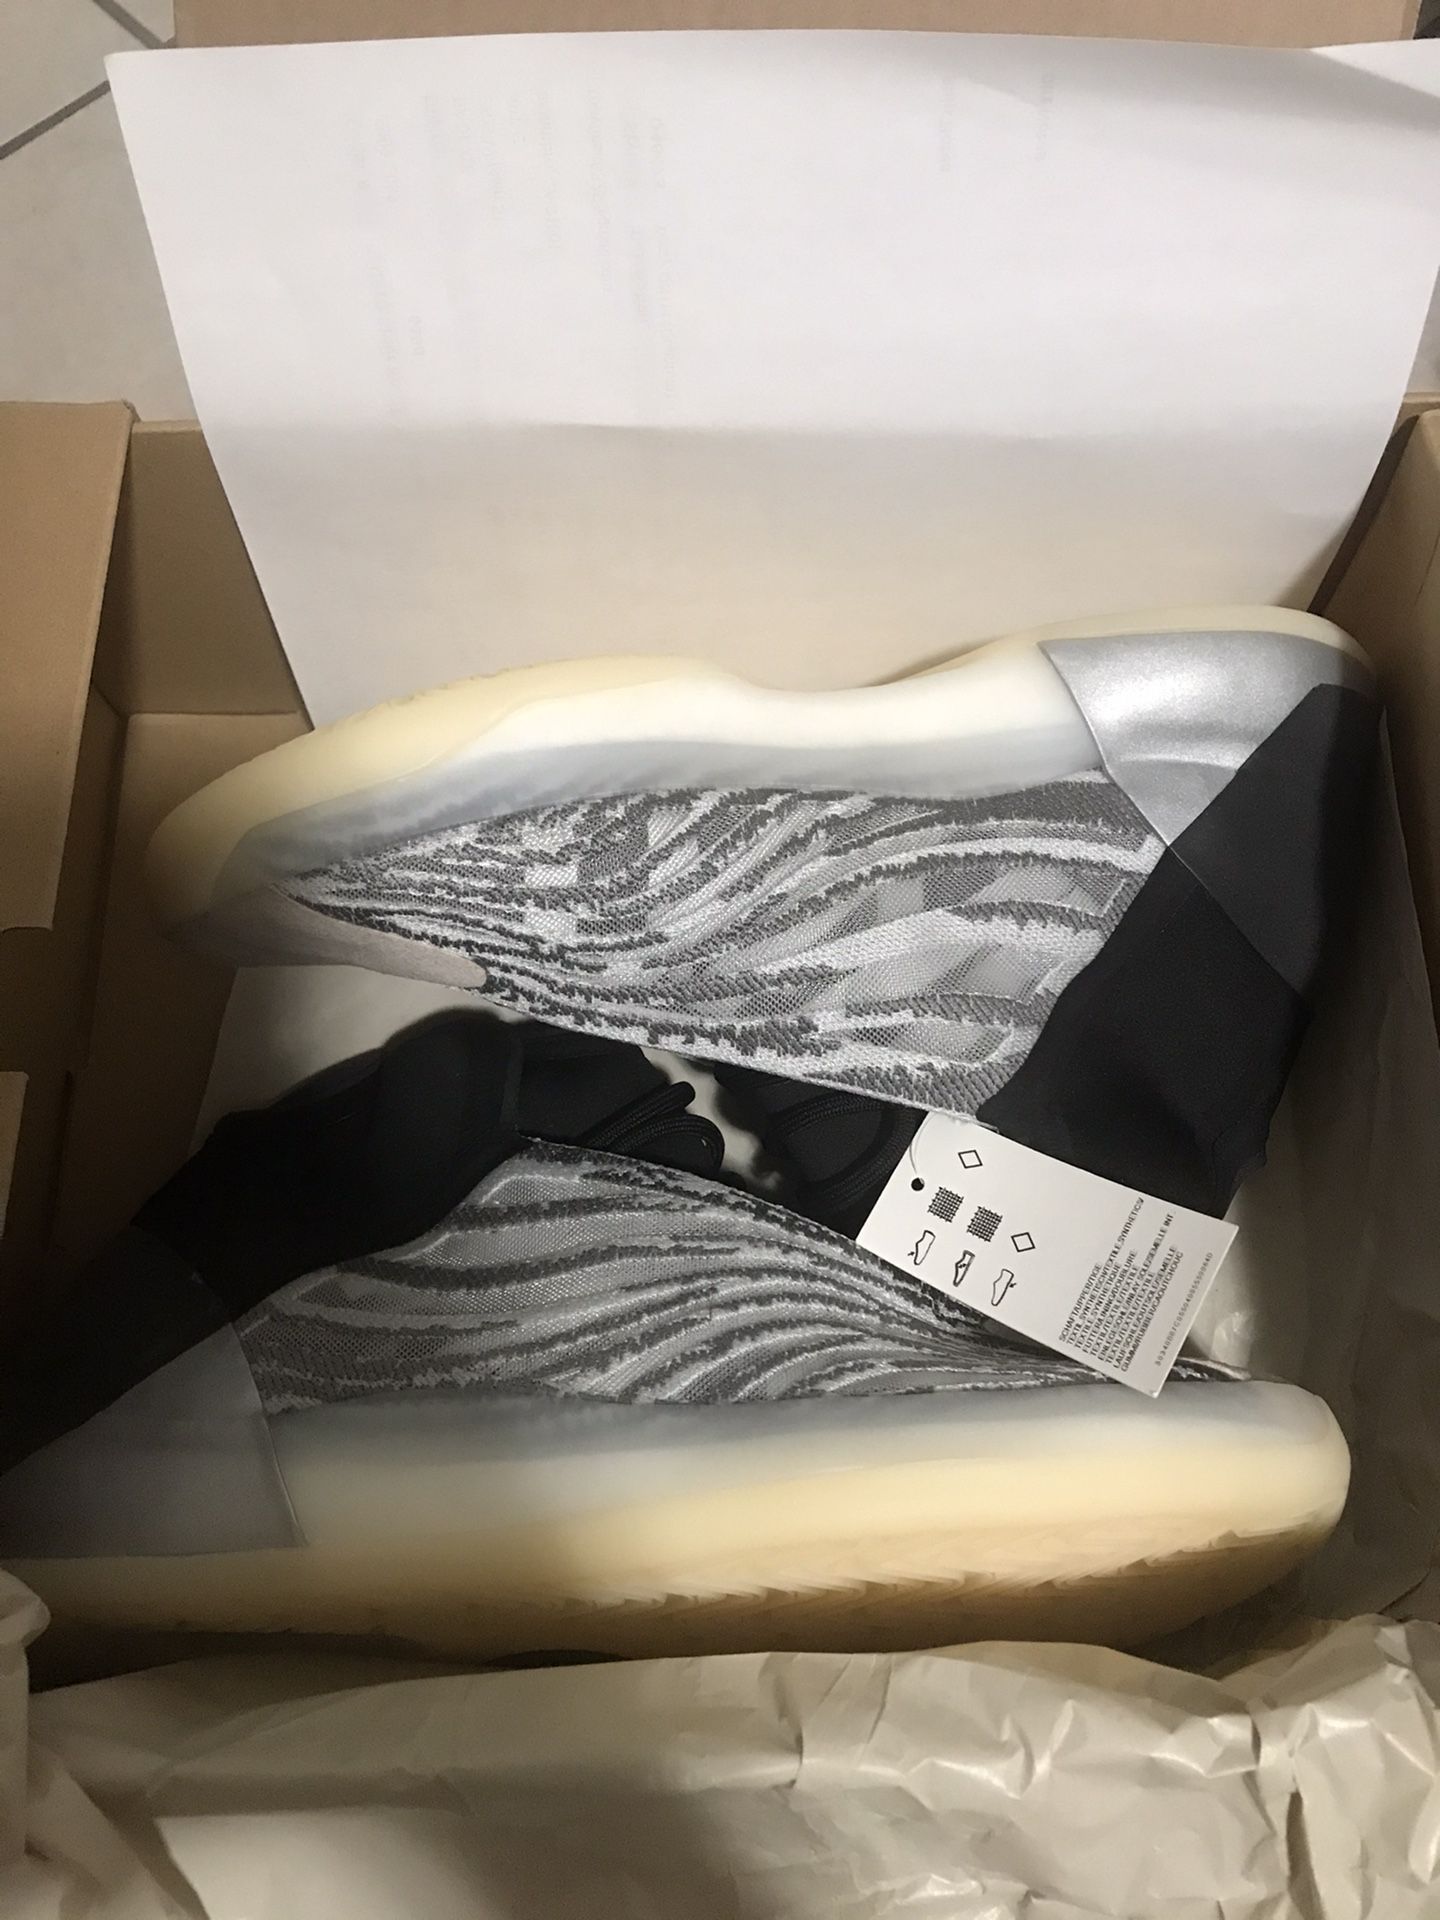 Adidas Yeezy QNTM Lifestyle mode Q46473 Basketball/Brand New Never Worn/Alhambra Pick Up Only/zelle or cash.